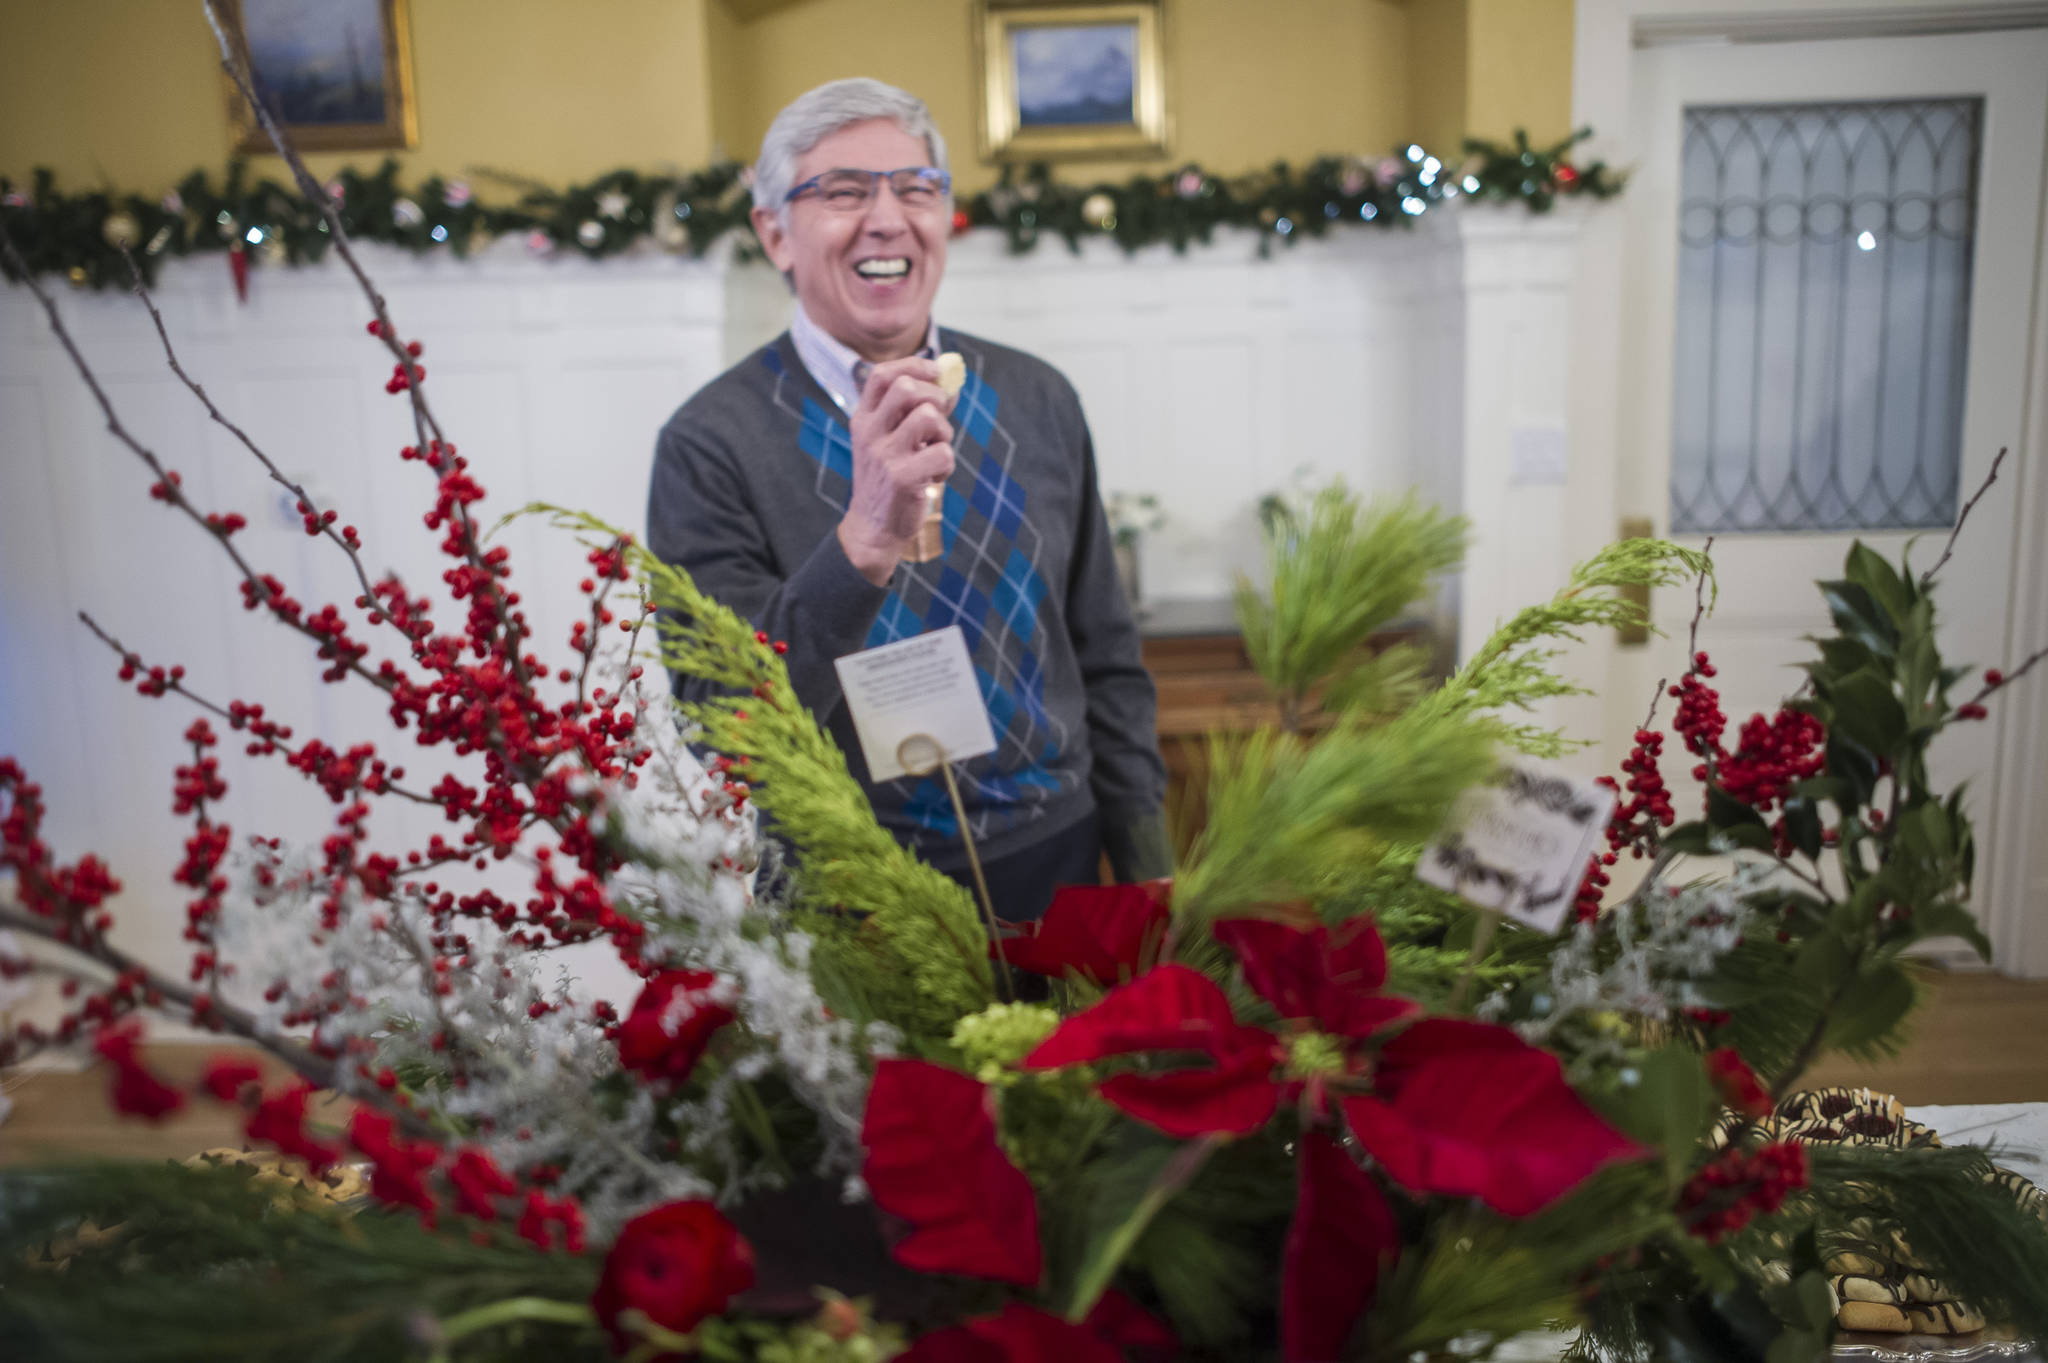 Lt. Gov. Byron Mallott laughs while sampling a cookie before the Governor’s Open House on Tuesday, Dec. 5, 2017. (Michael Penn | Juneau Empire)